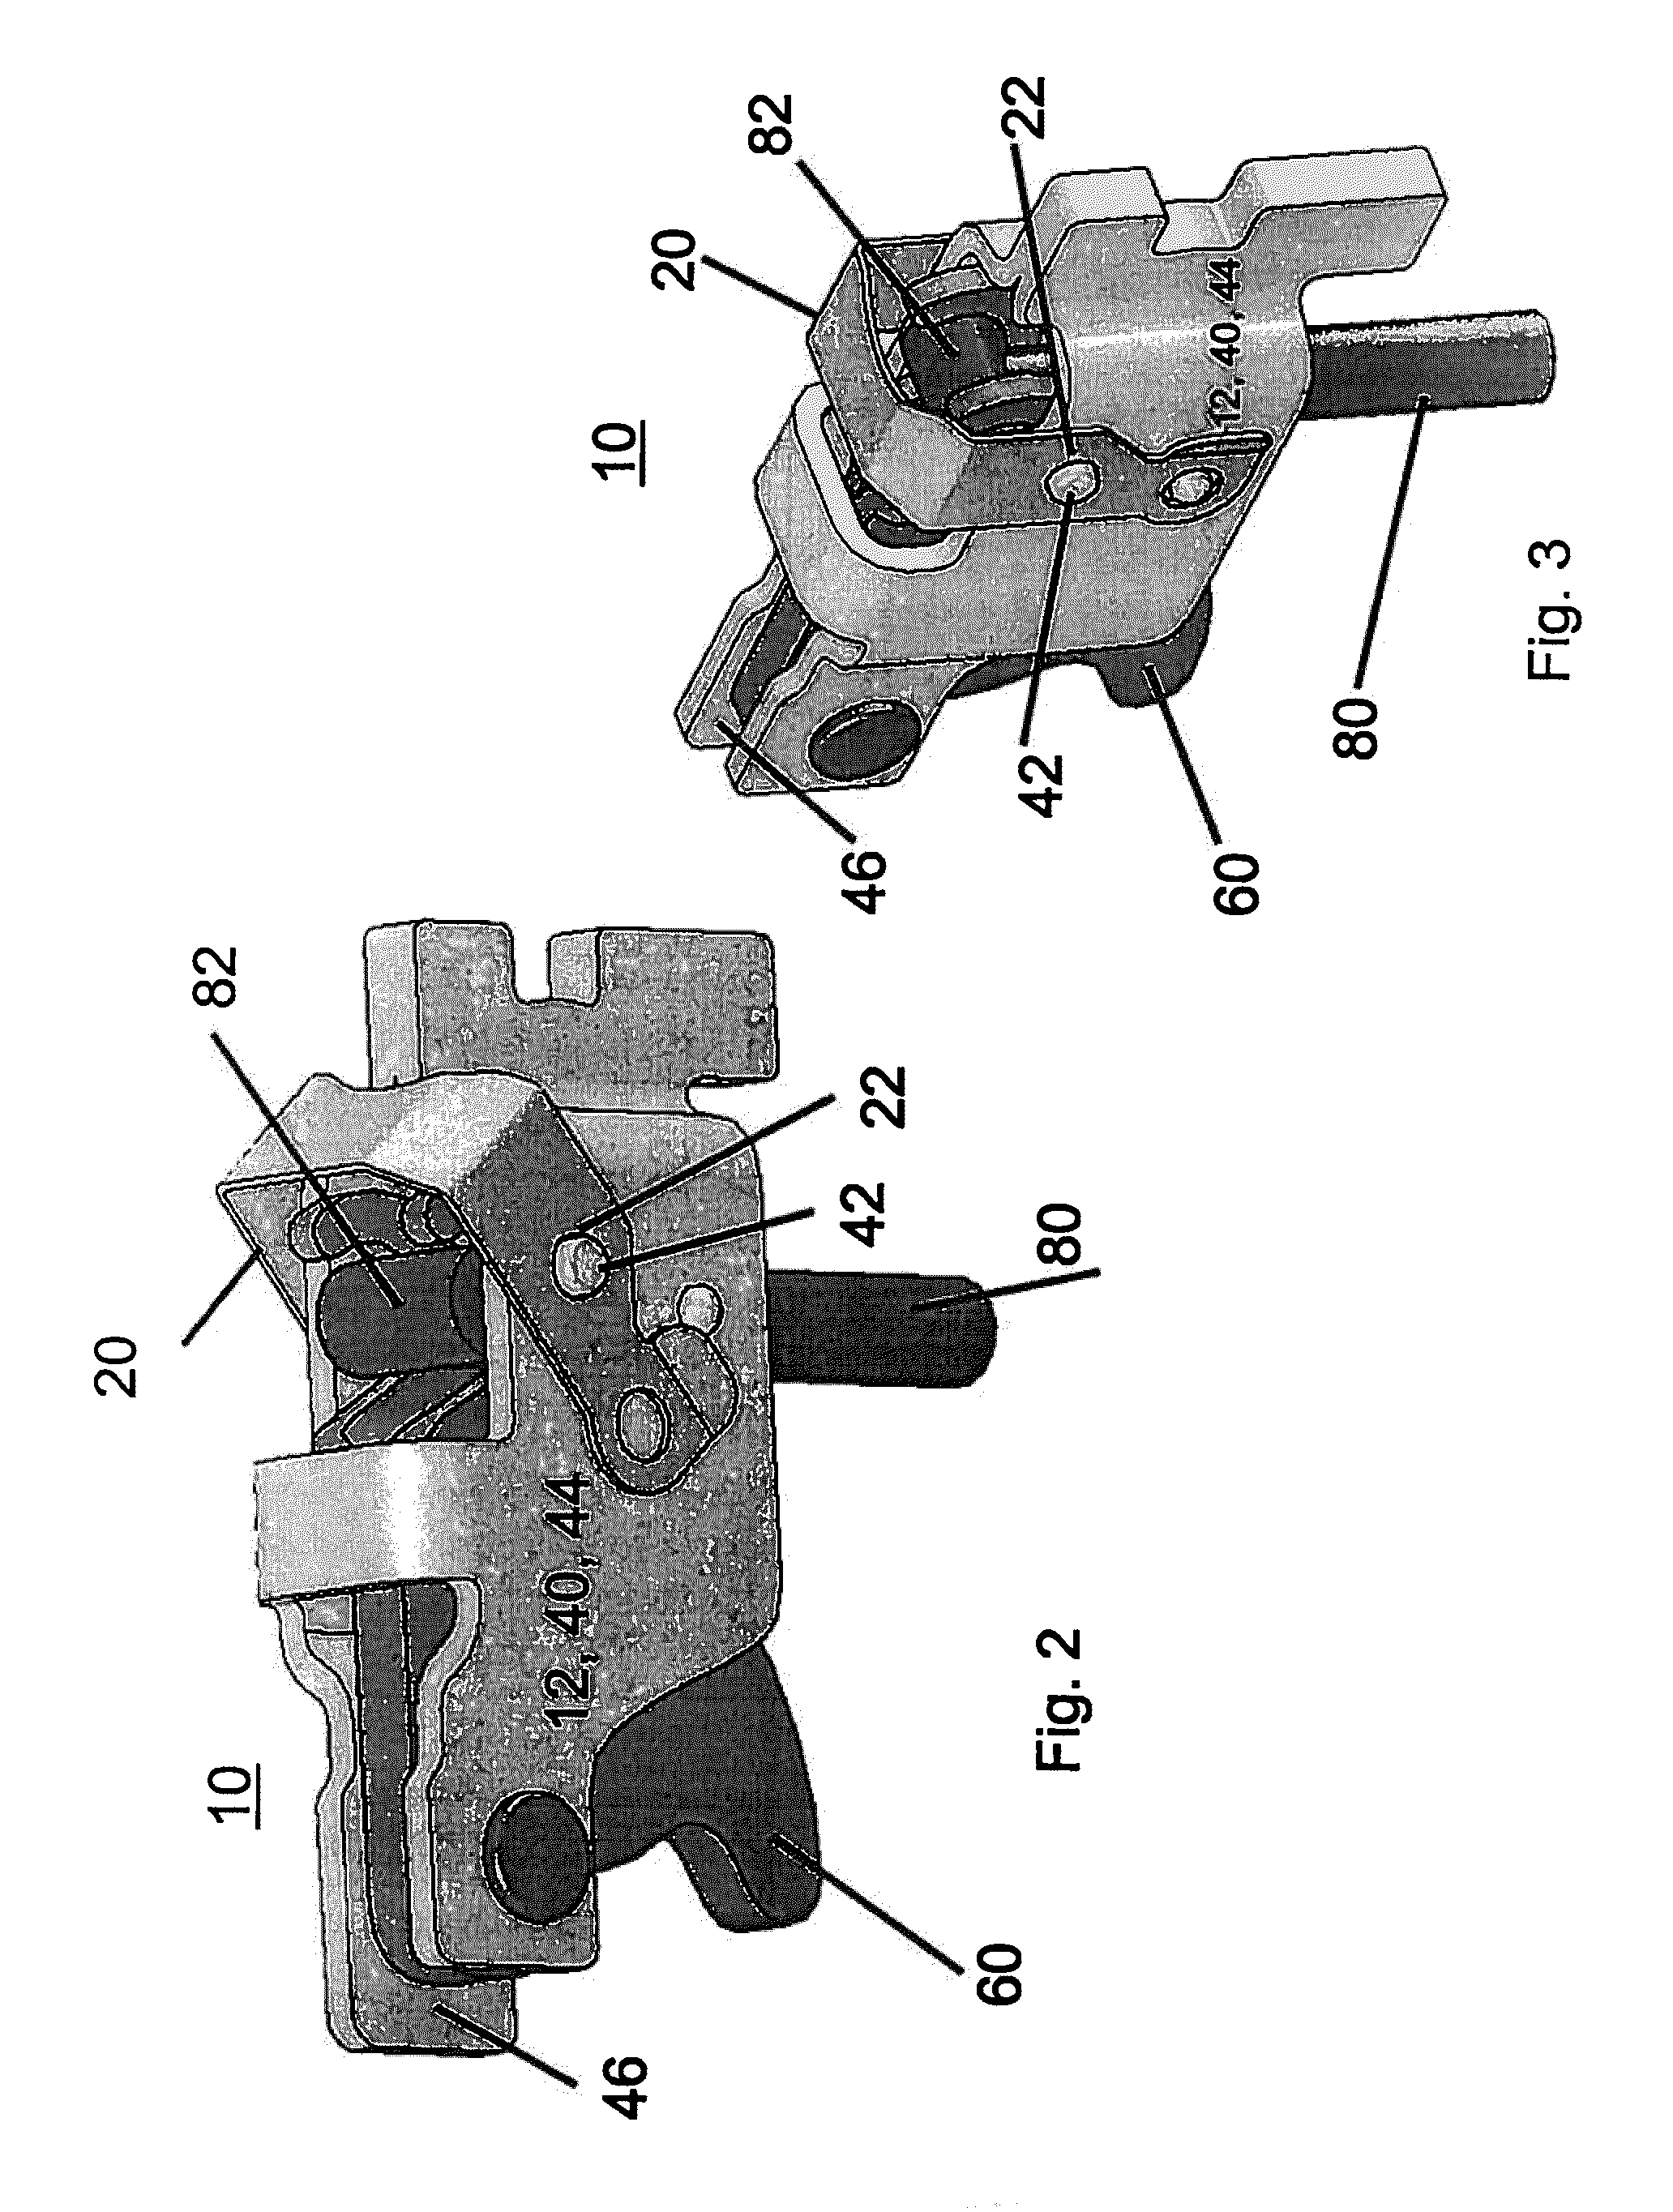 Cable end retention clip assembly and method